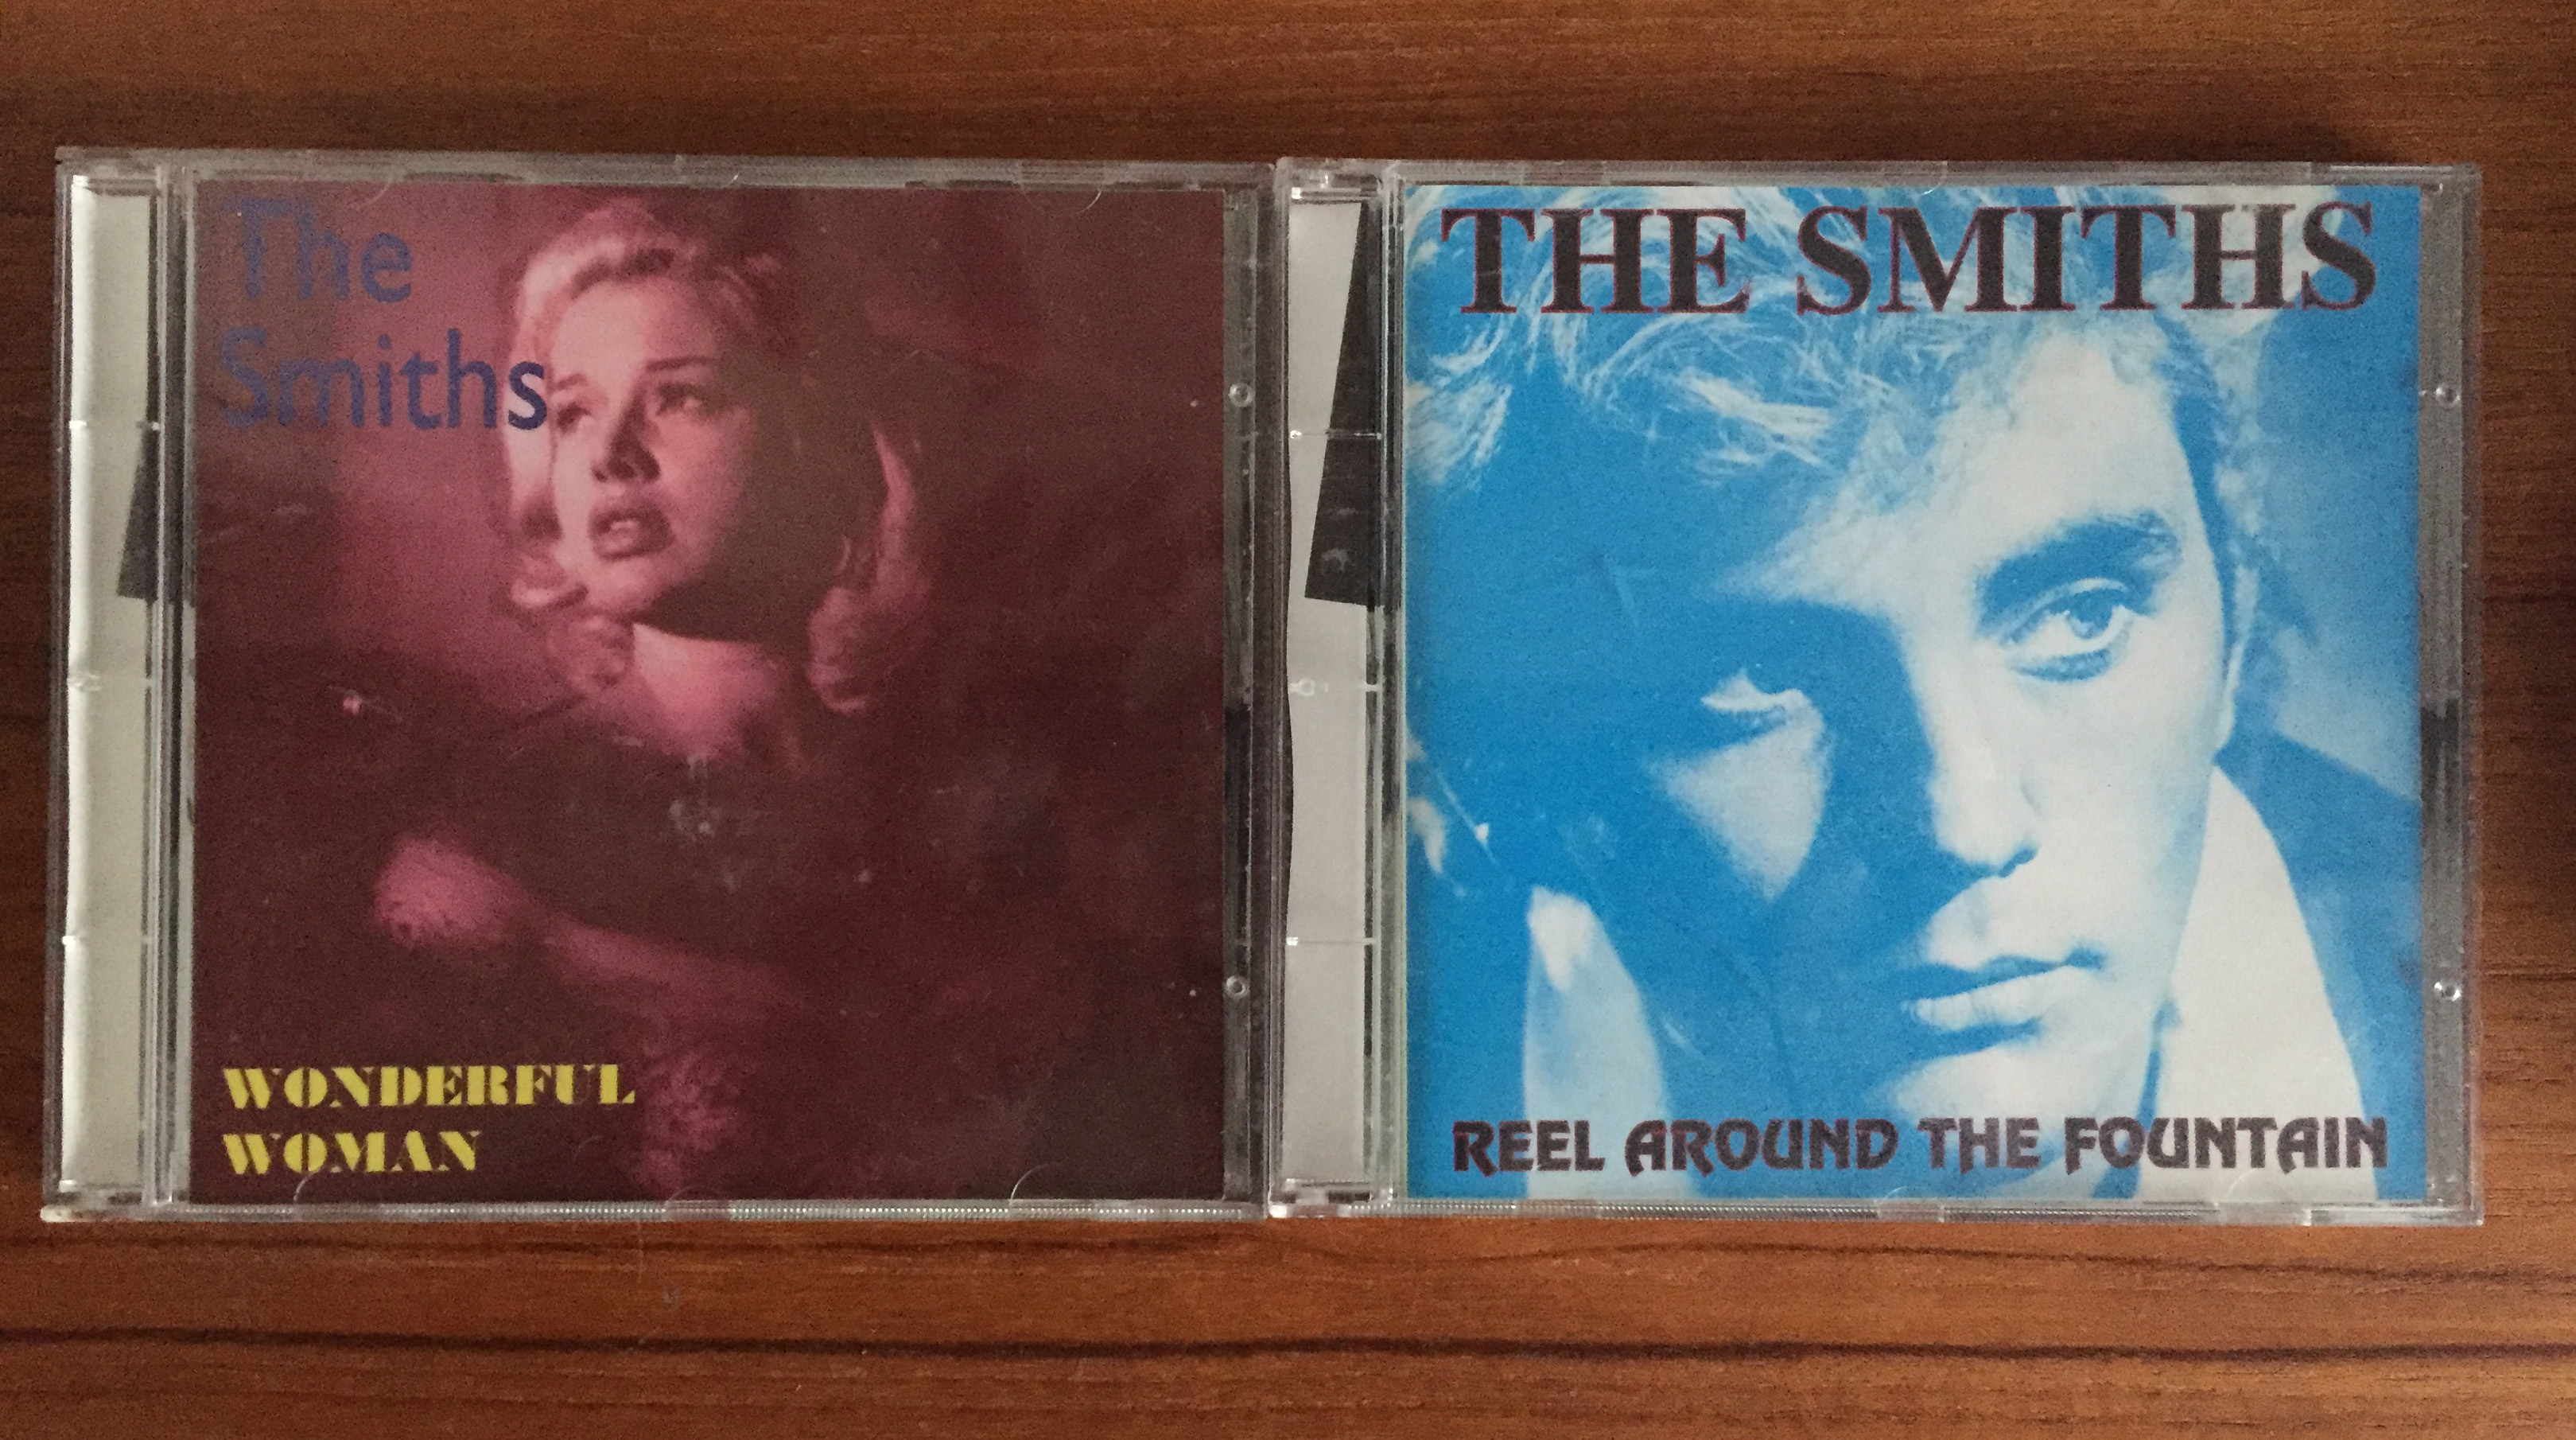 'Reel Around the Fountain' and 'Wonderful Woman' unofficial CDs.